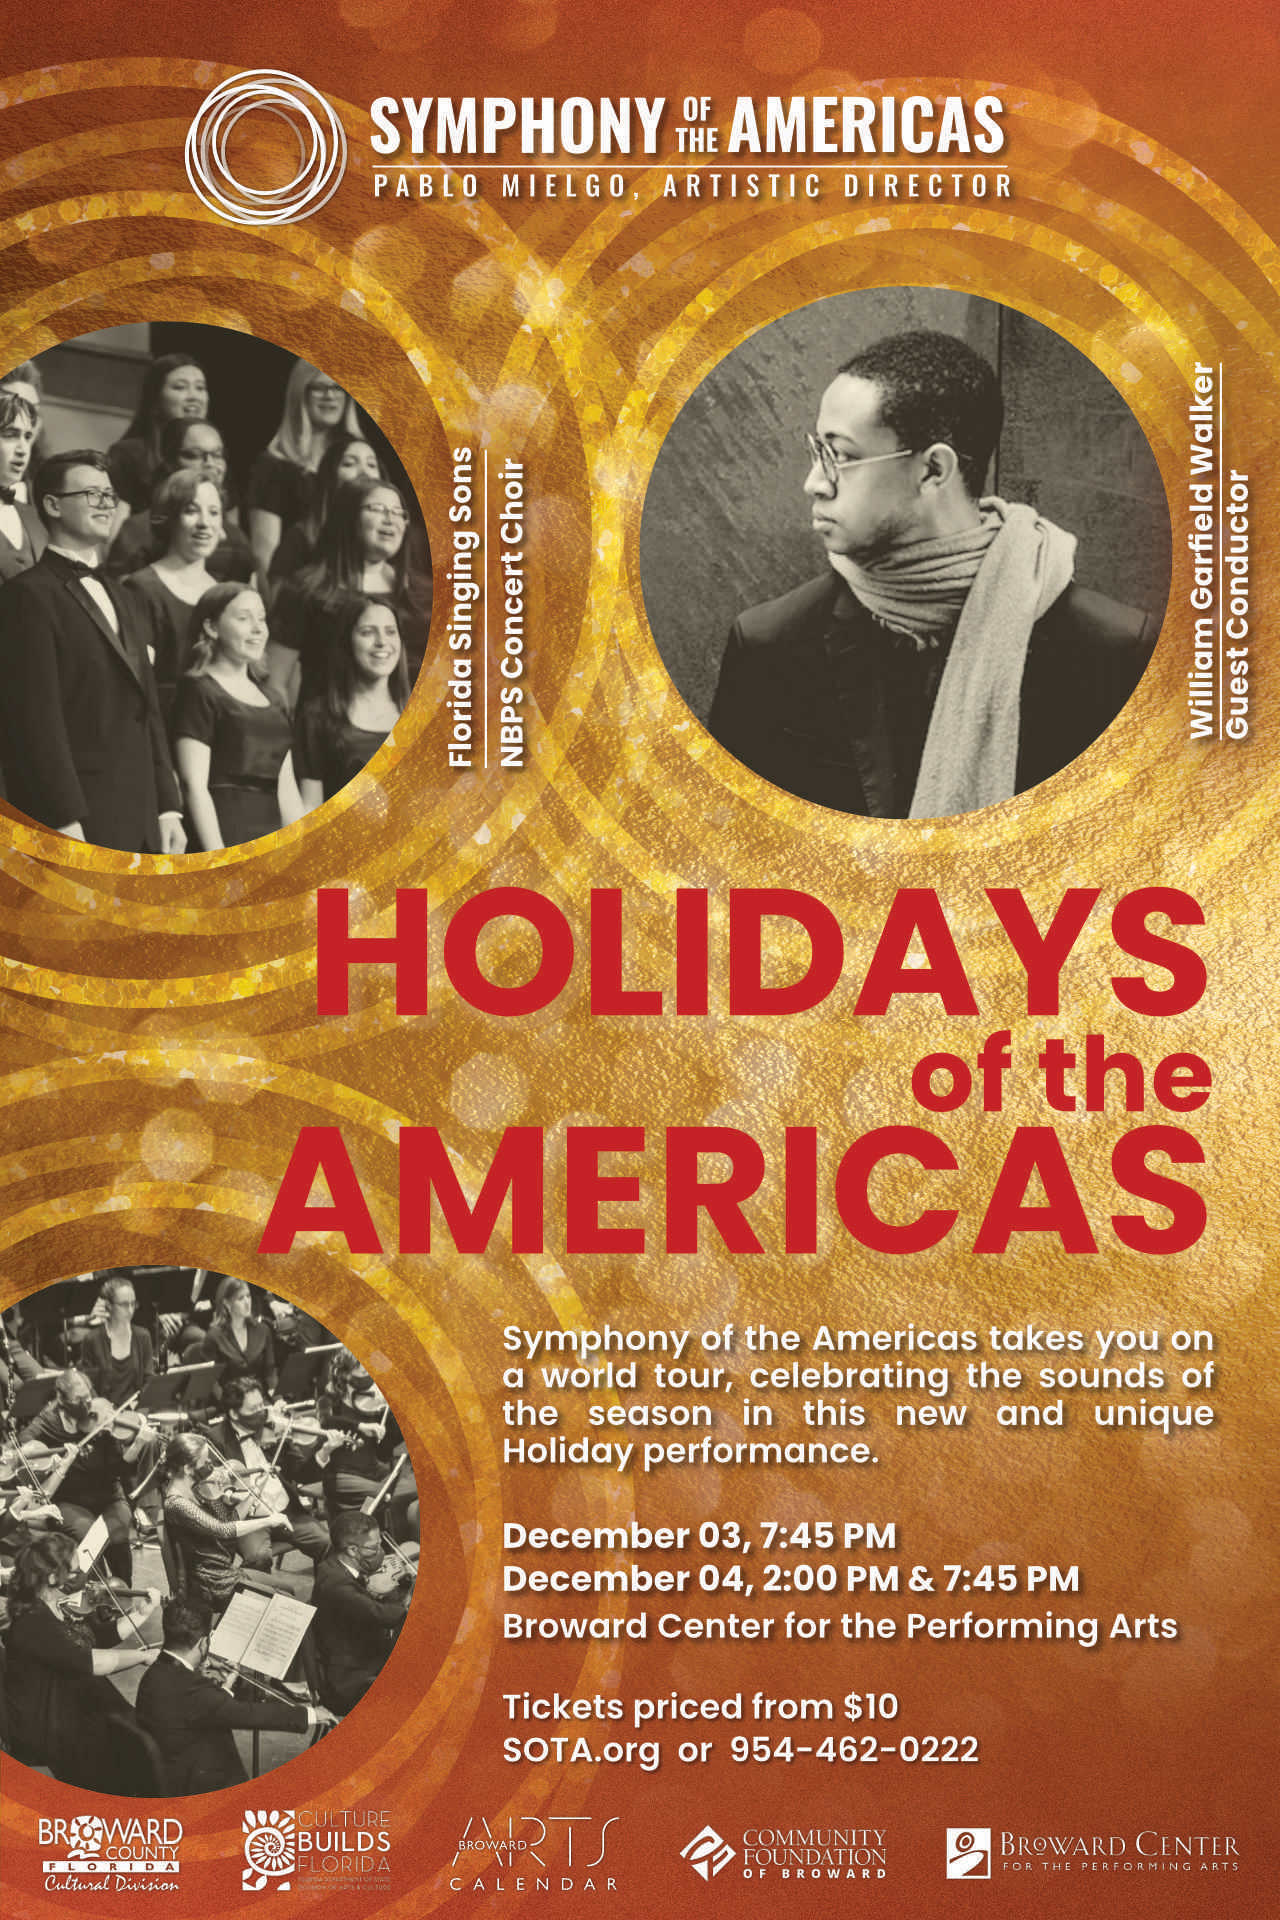 SOTA Holiday of the Americas poster